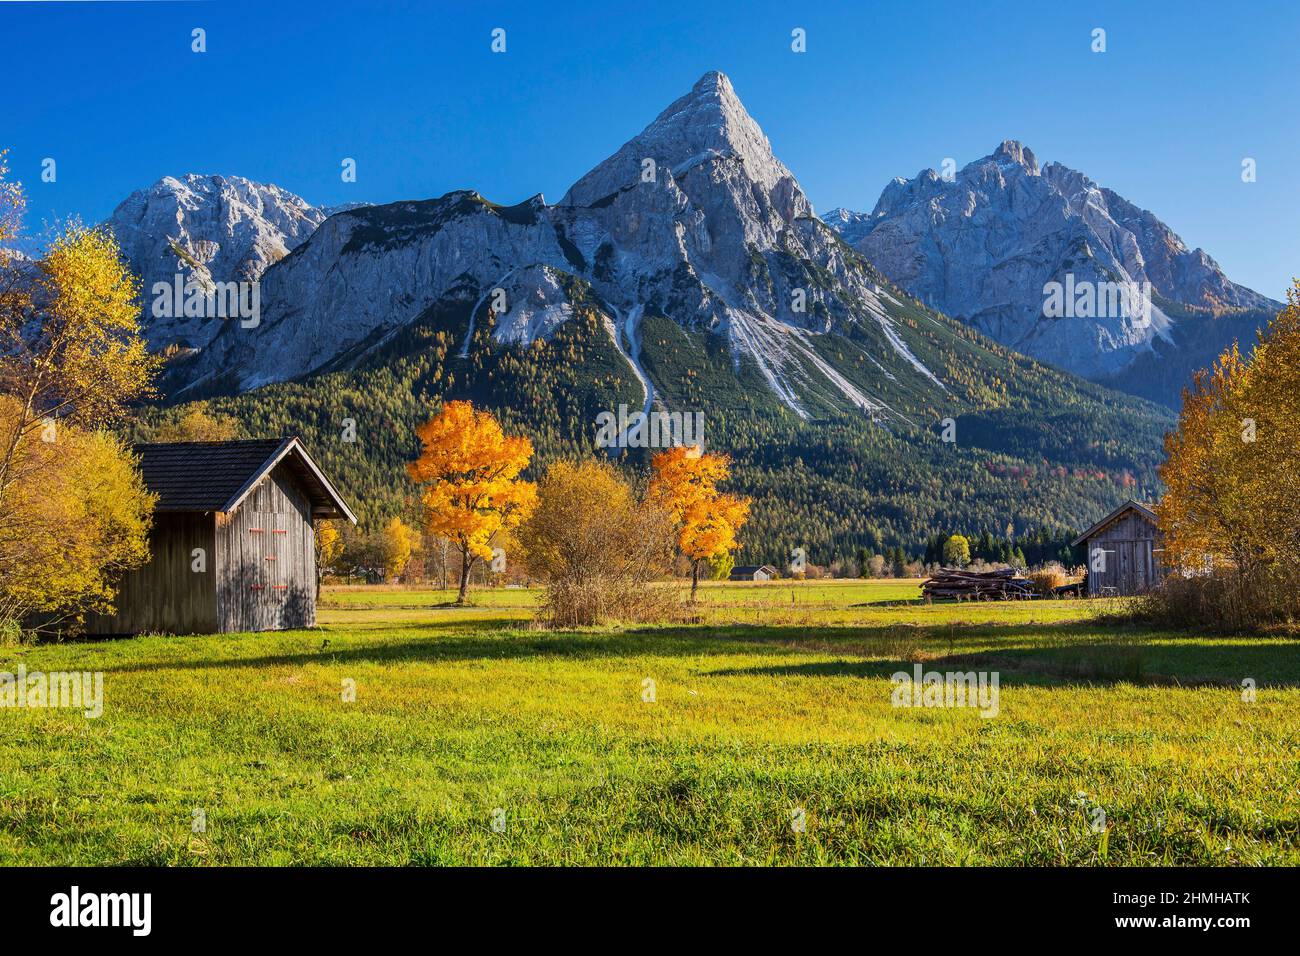 Autumn landscape in the Lermooser Moos with maple trees against the Sonnenspitze 2417m in the Mieminger chain, Ehrwald, Loisachtal, Tyrol, Austria Stock Photo